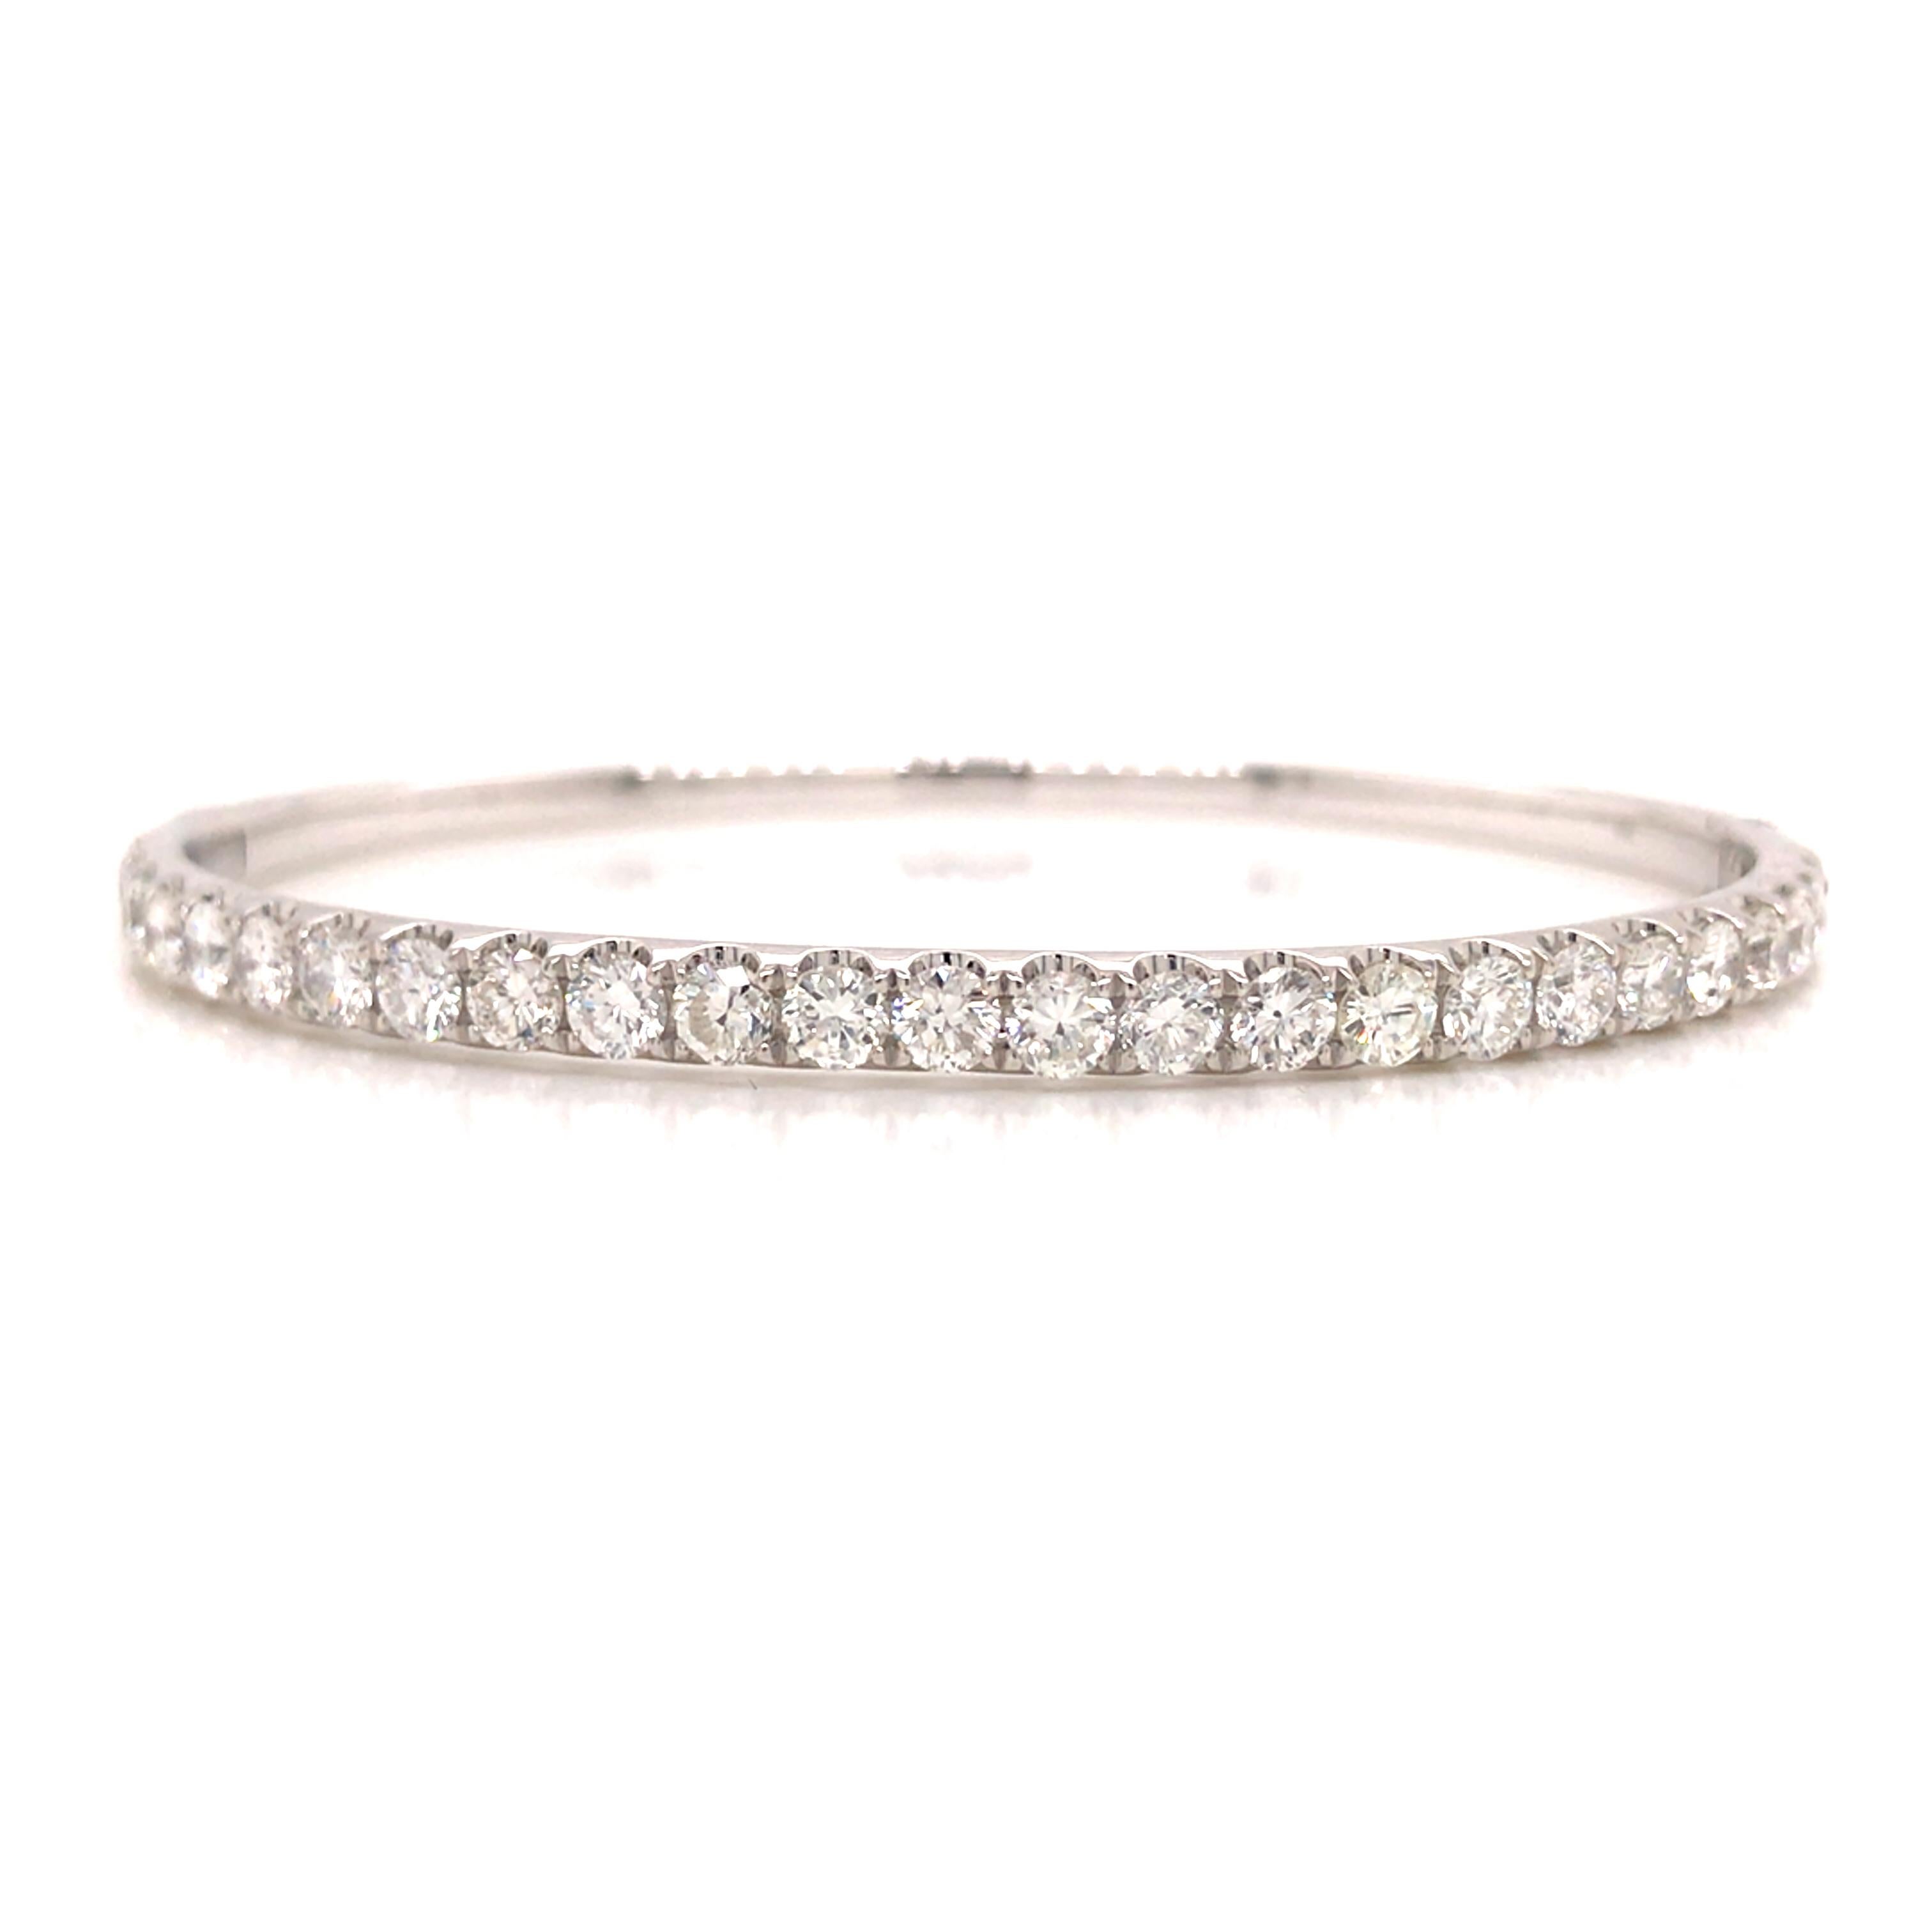 Diamond Bangle in 18K White Gold.  (25) Round Brilliant Cut Diamonds weighing 3.0 carat total weight, G-H in color and VS-SI in clarity are expertly set.  The Bangle measures 6 1/4 inch inner circumference and 1/8 inch in width.  Hinge opening.